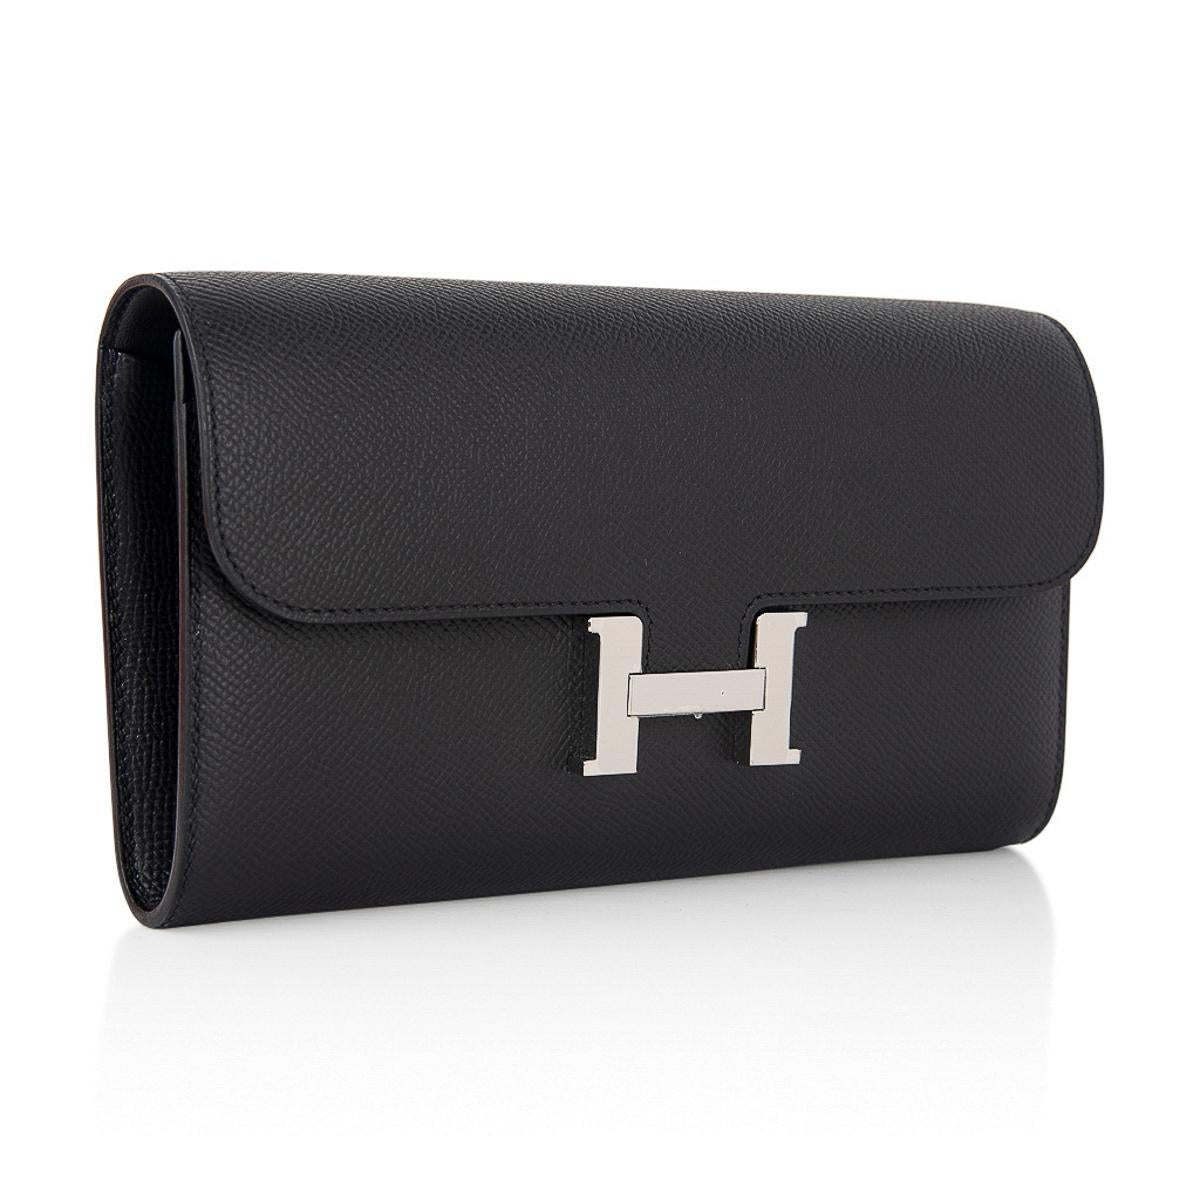 Mightychic offers a coveted Hermes Constance Long To Go featured in classic Black.
Accentuated with Palladium hardware and Epsom leather.
The consummate Wallet on a Chain!
Detachable strap allows you to carry the wallet / bag as a clutch.
Classic